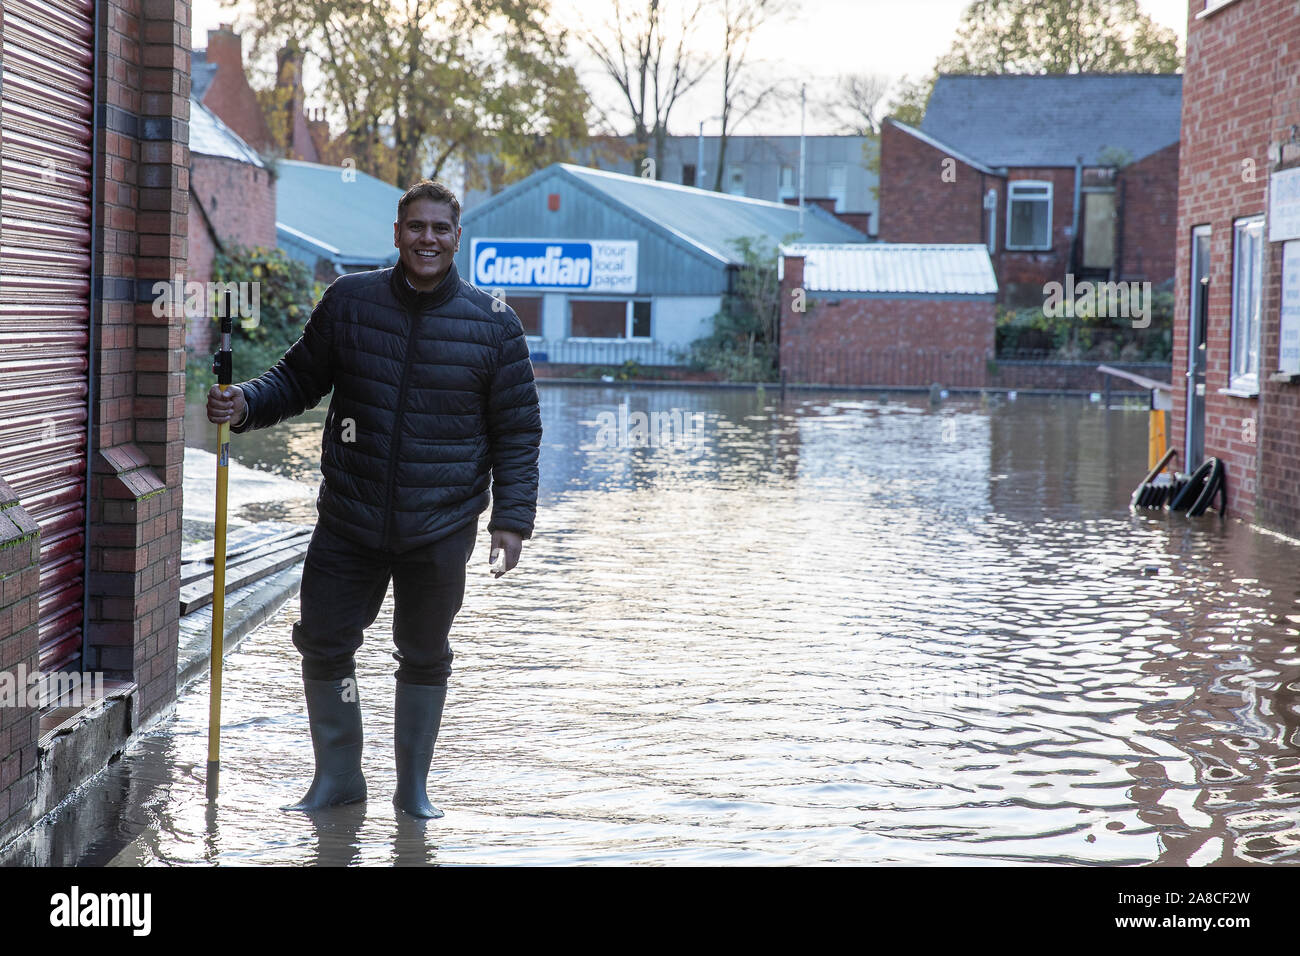 Worksop, UK. 8th November 2019. Flooding in Worksop, UK, following heavy rain which caused the River Ryton to burst it's banks. Credit: Andy Gallagher/Alamy Live News Stock Photo